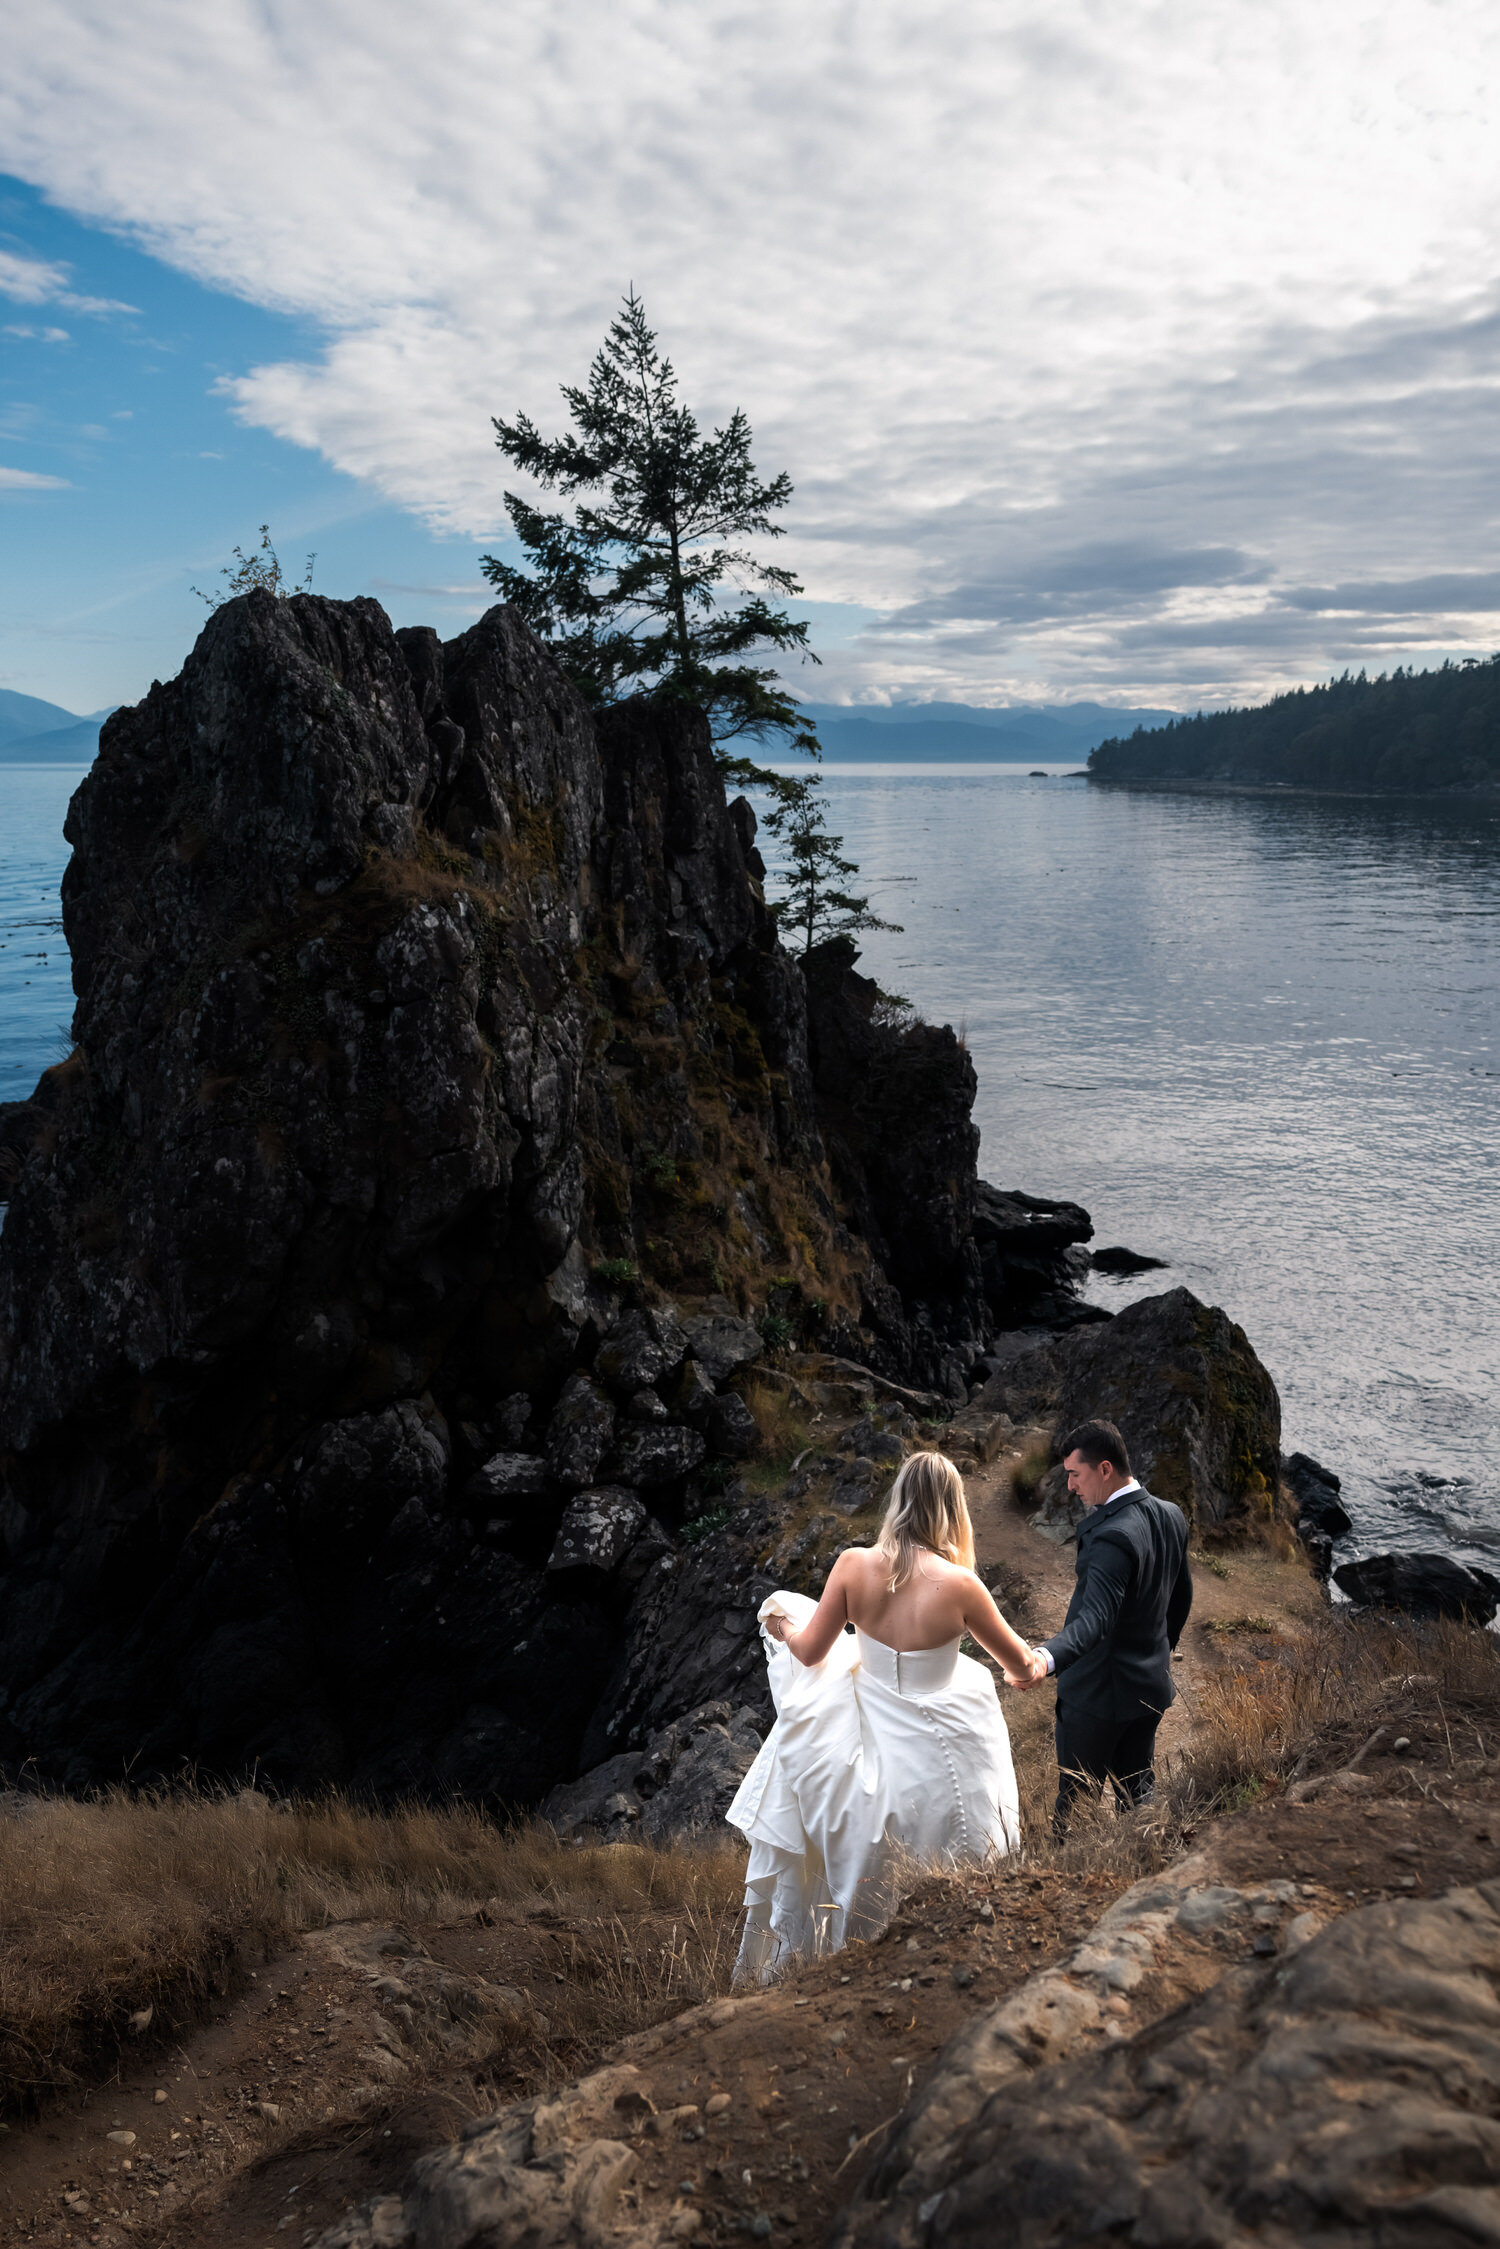 Vancouver Island Adventure Elopement and Small Wedding Photographer - Allie Knull's Photography-16.jpg